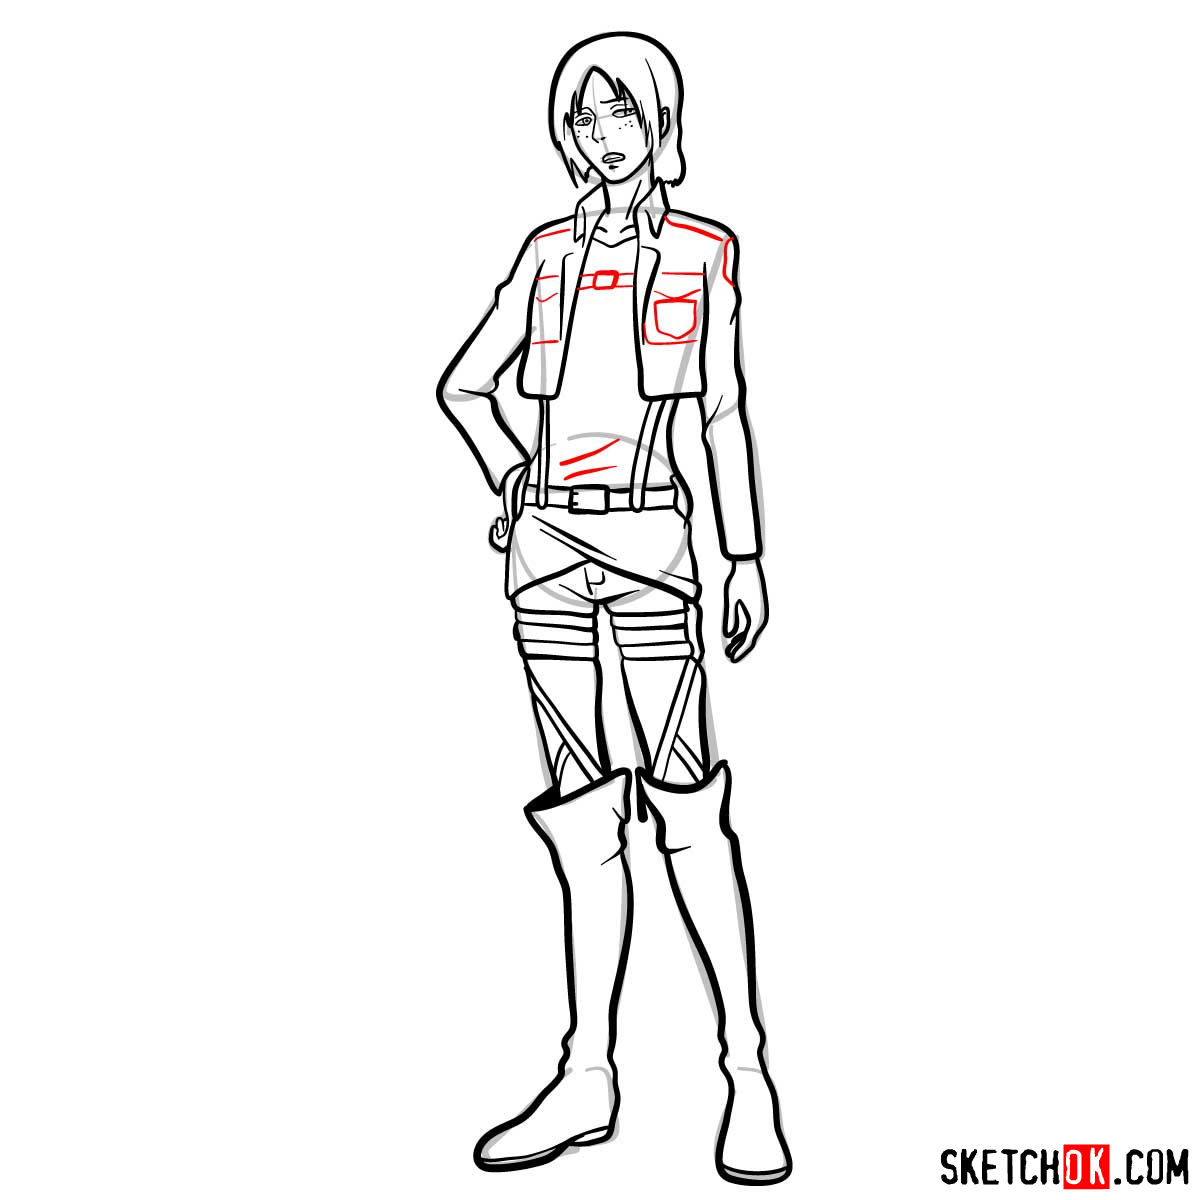 How to draw Ymir from Attack on Titan - step 13